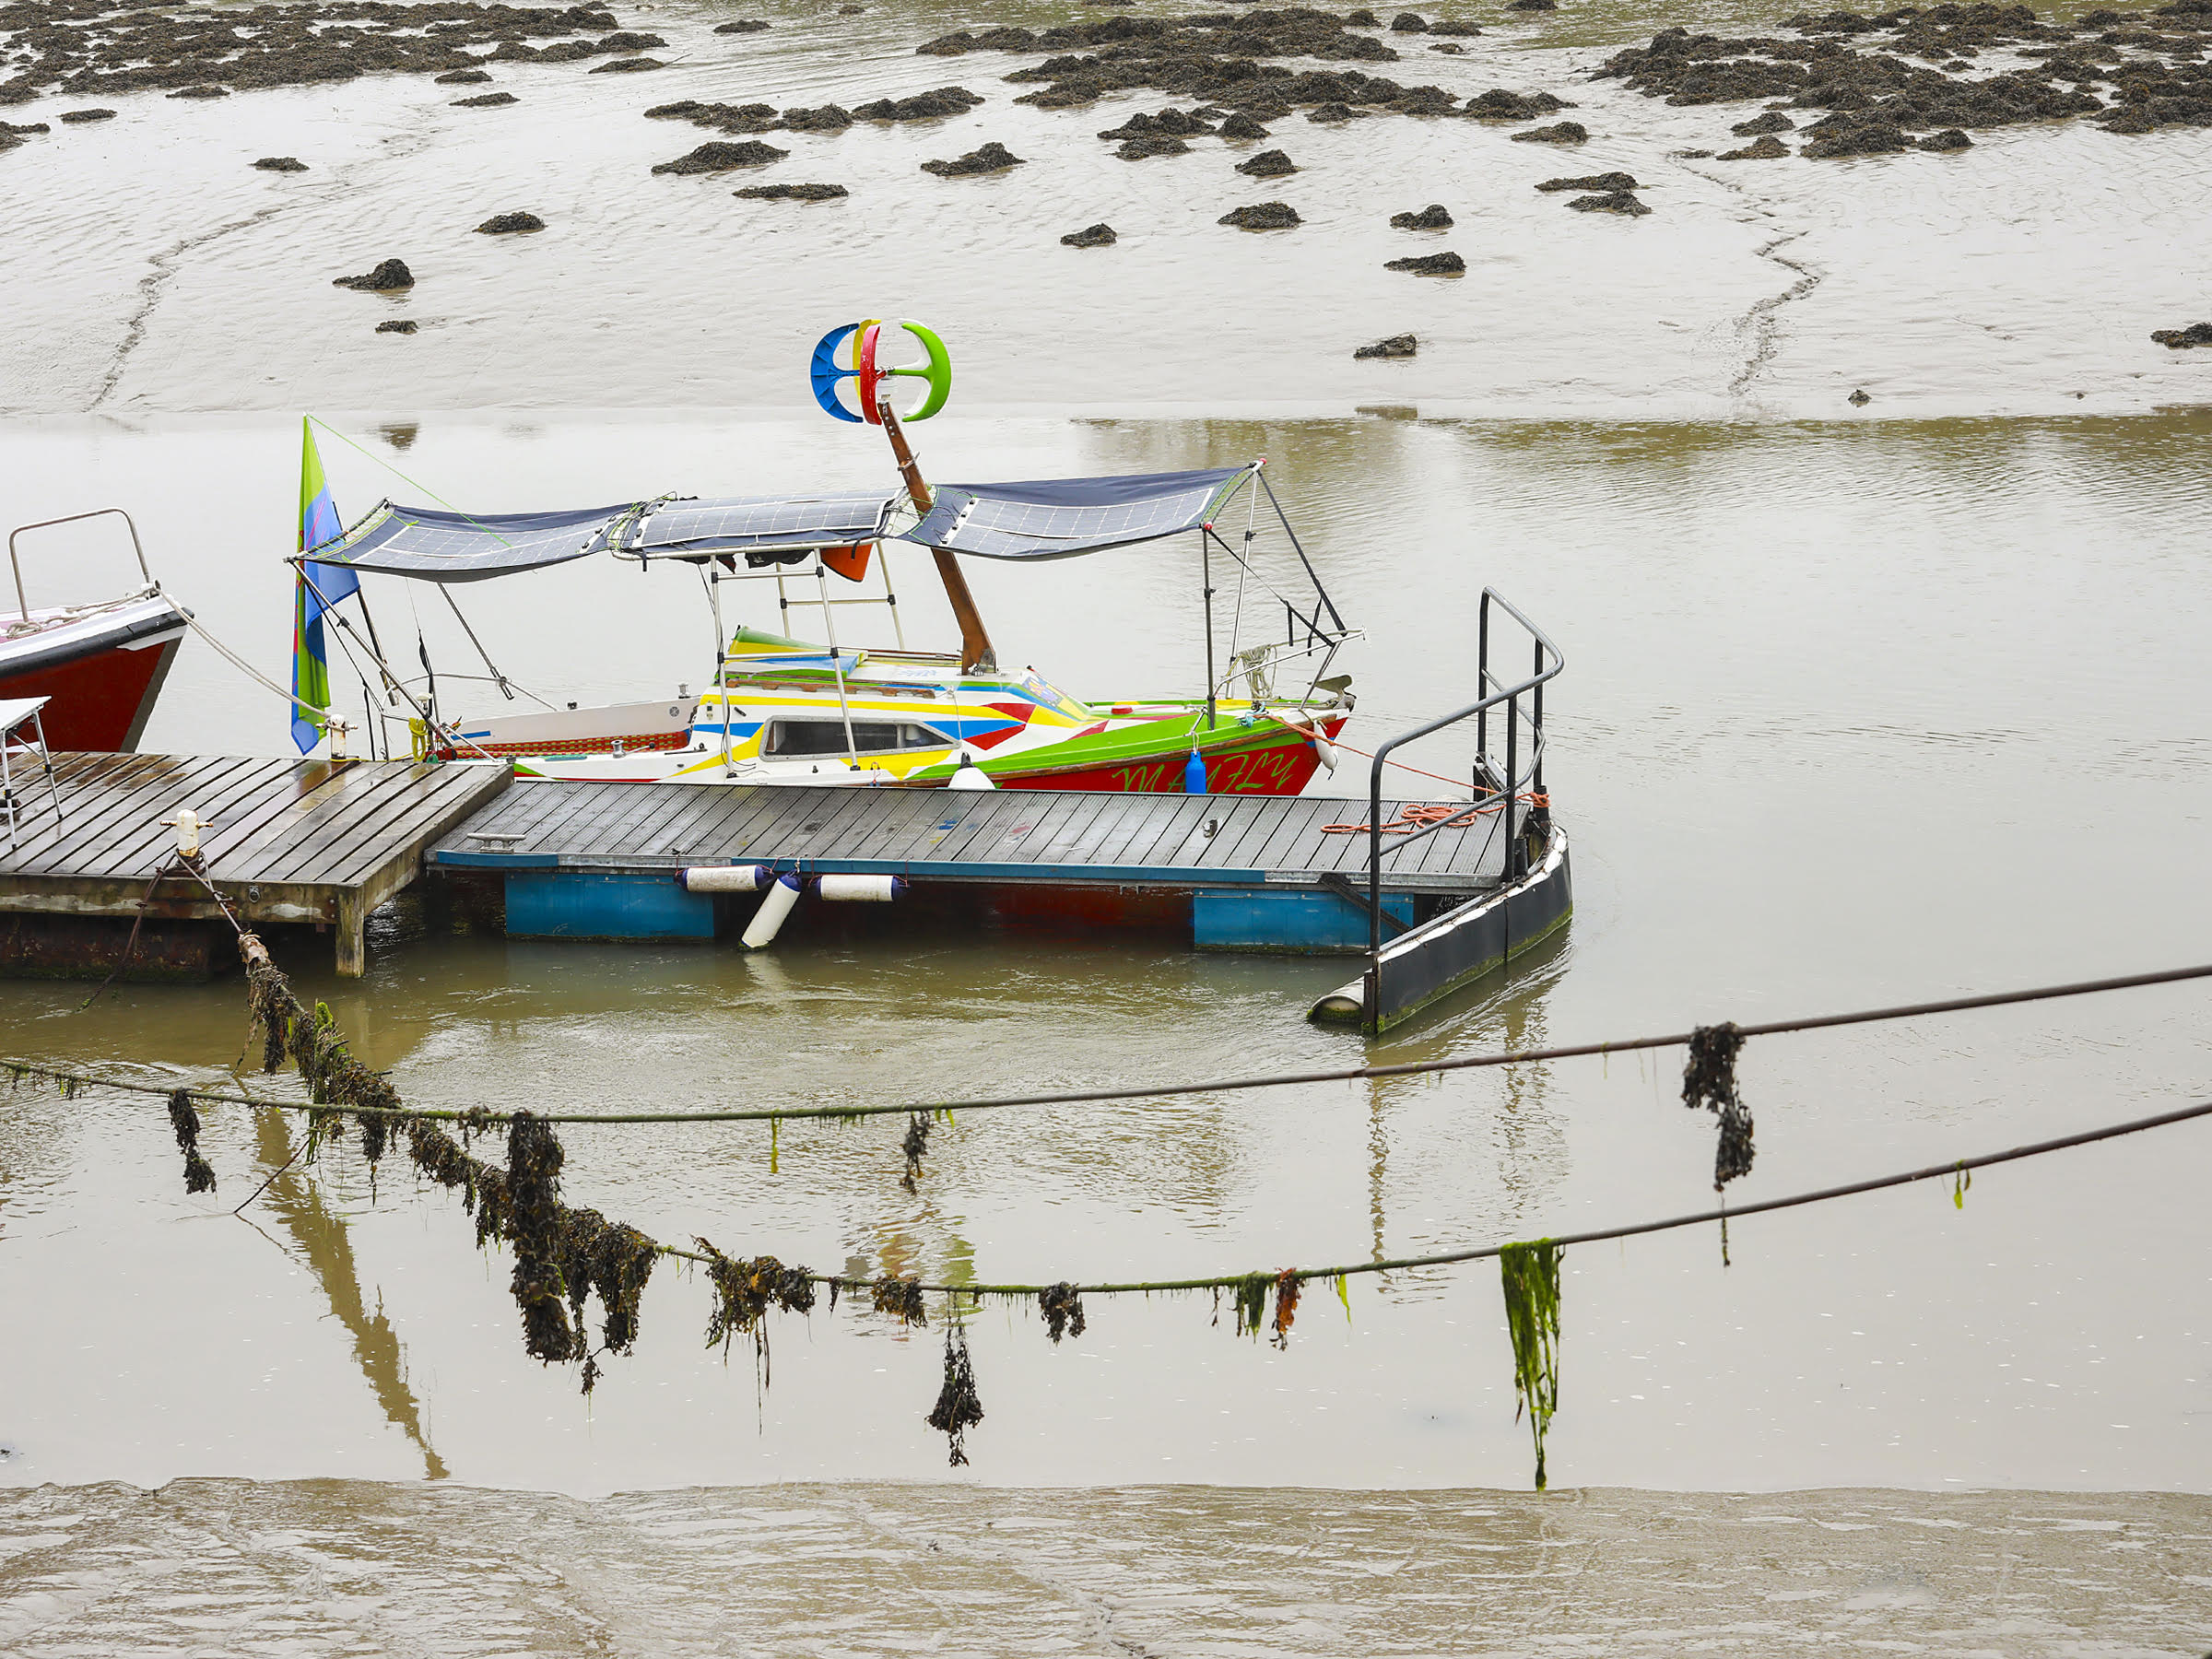 The Eco Showboat Mayfly launched from Askeaton